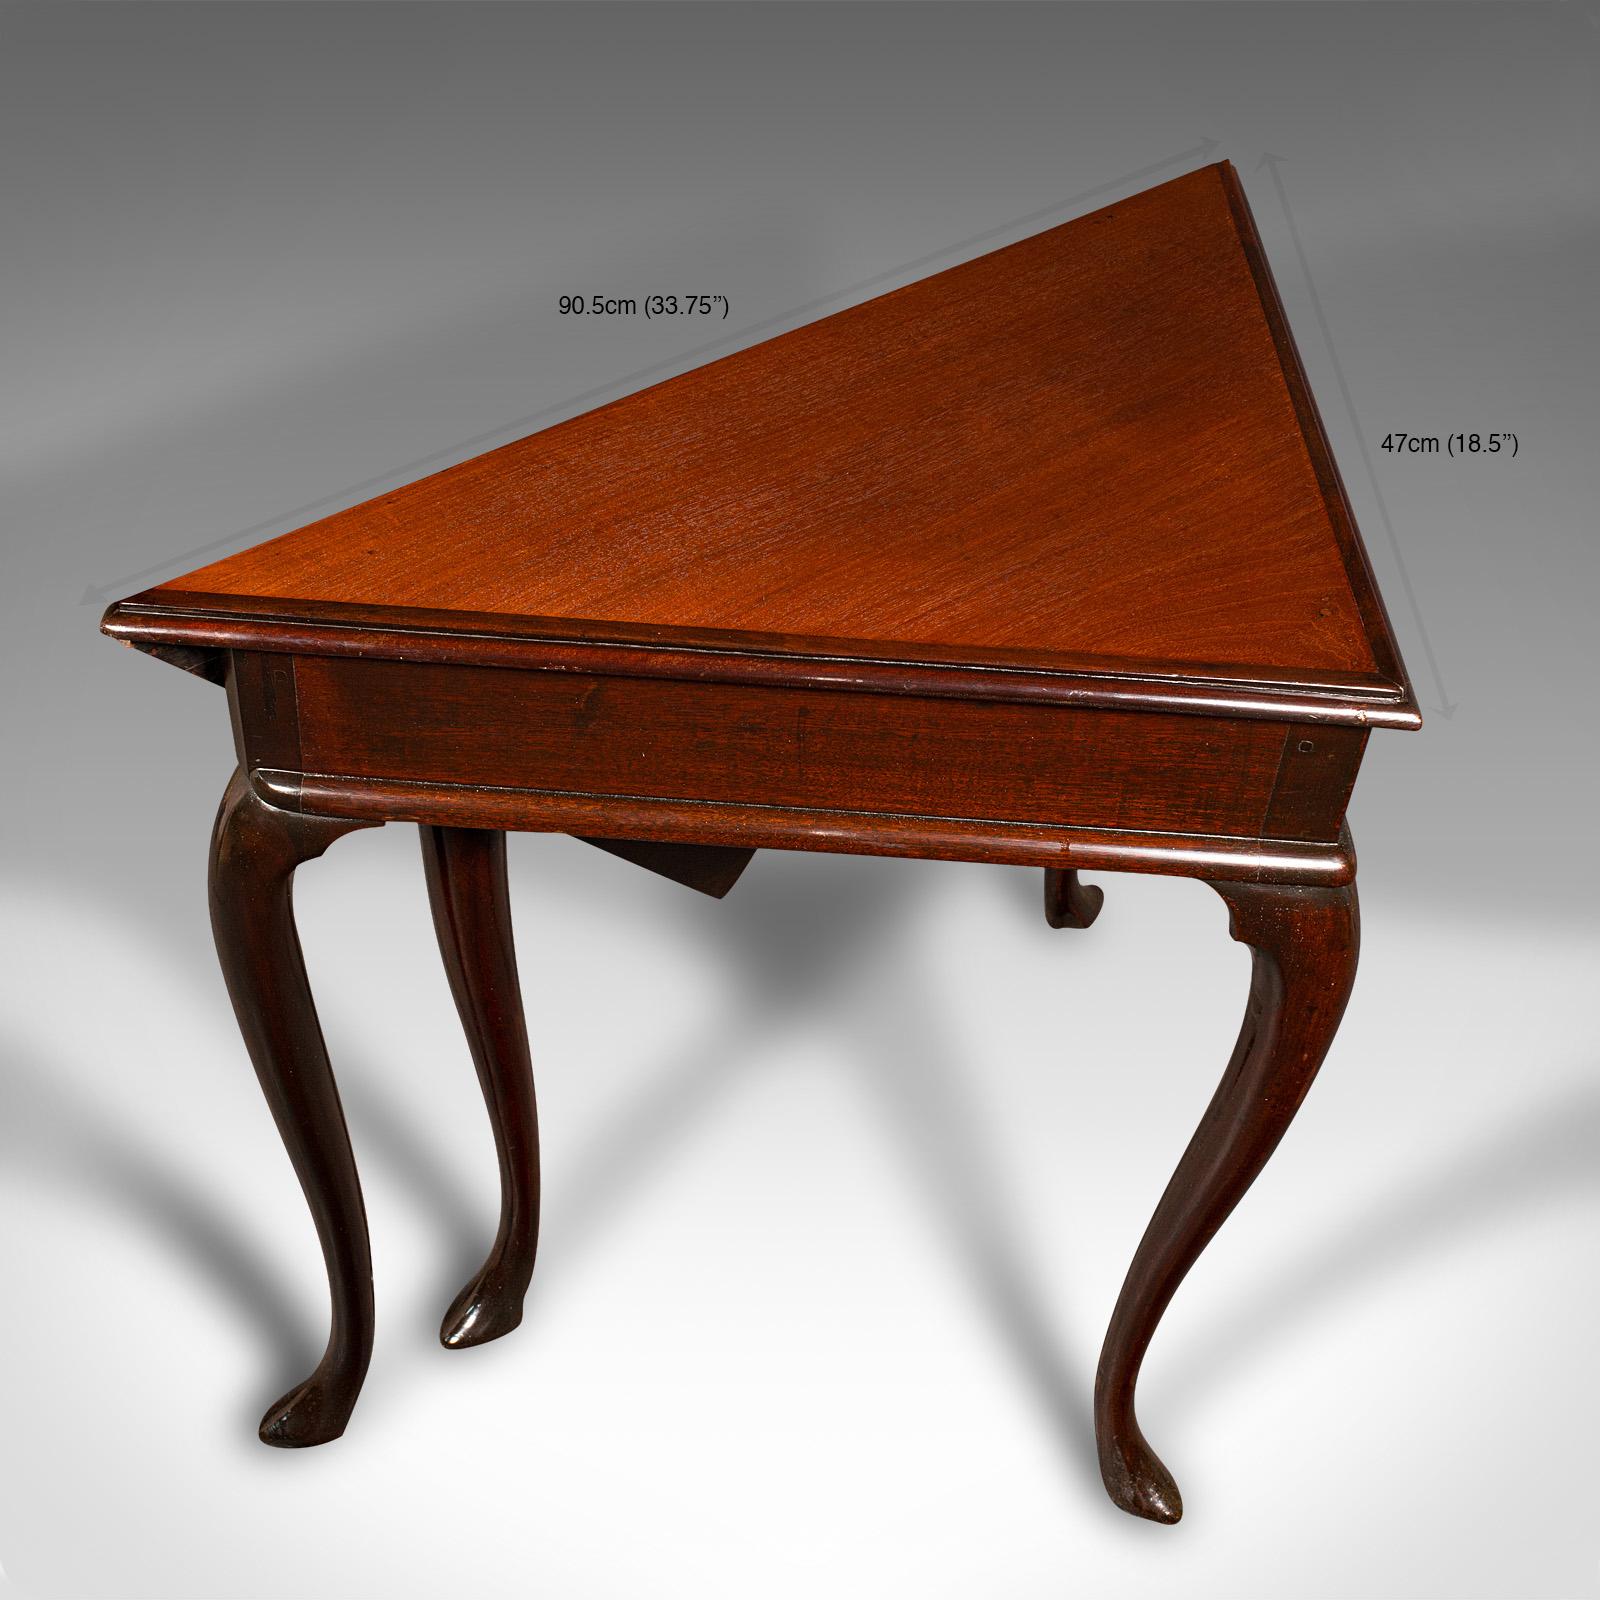 Antique Supper Table, English, Folding, Occasional, Display, Georgian, C.1770 For Sale 4